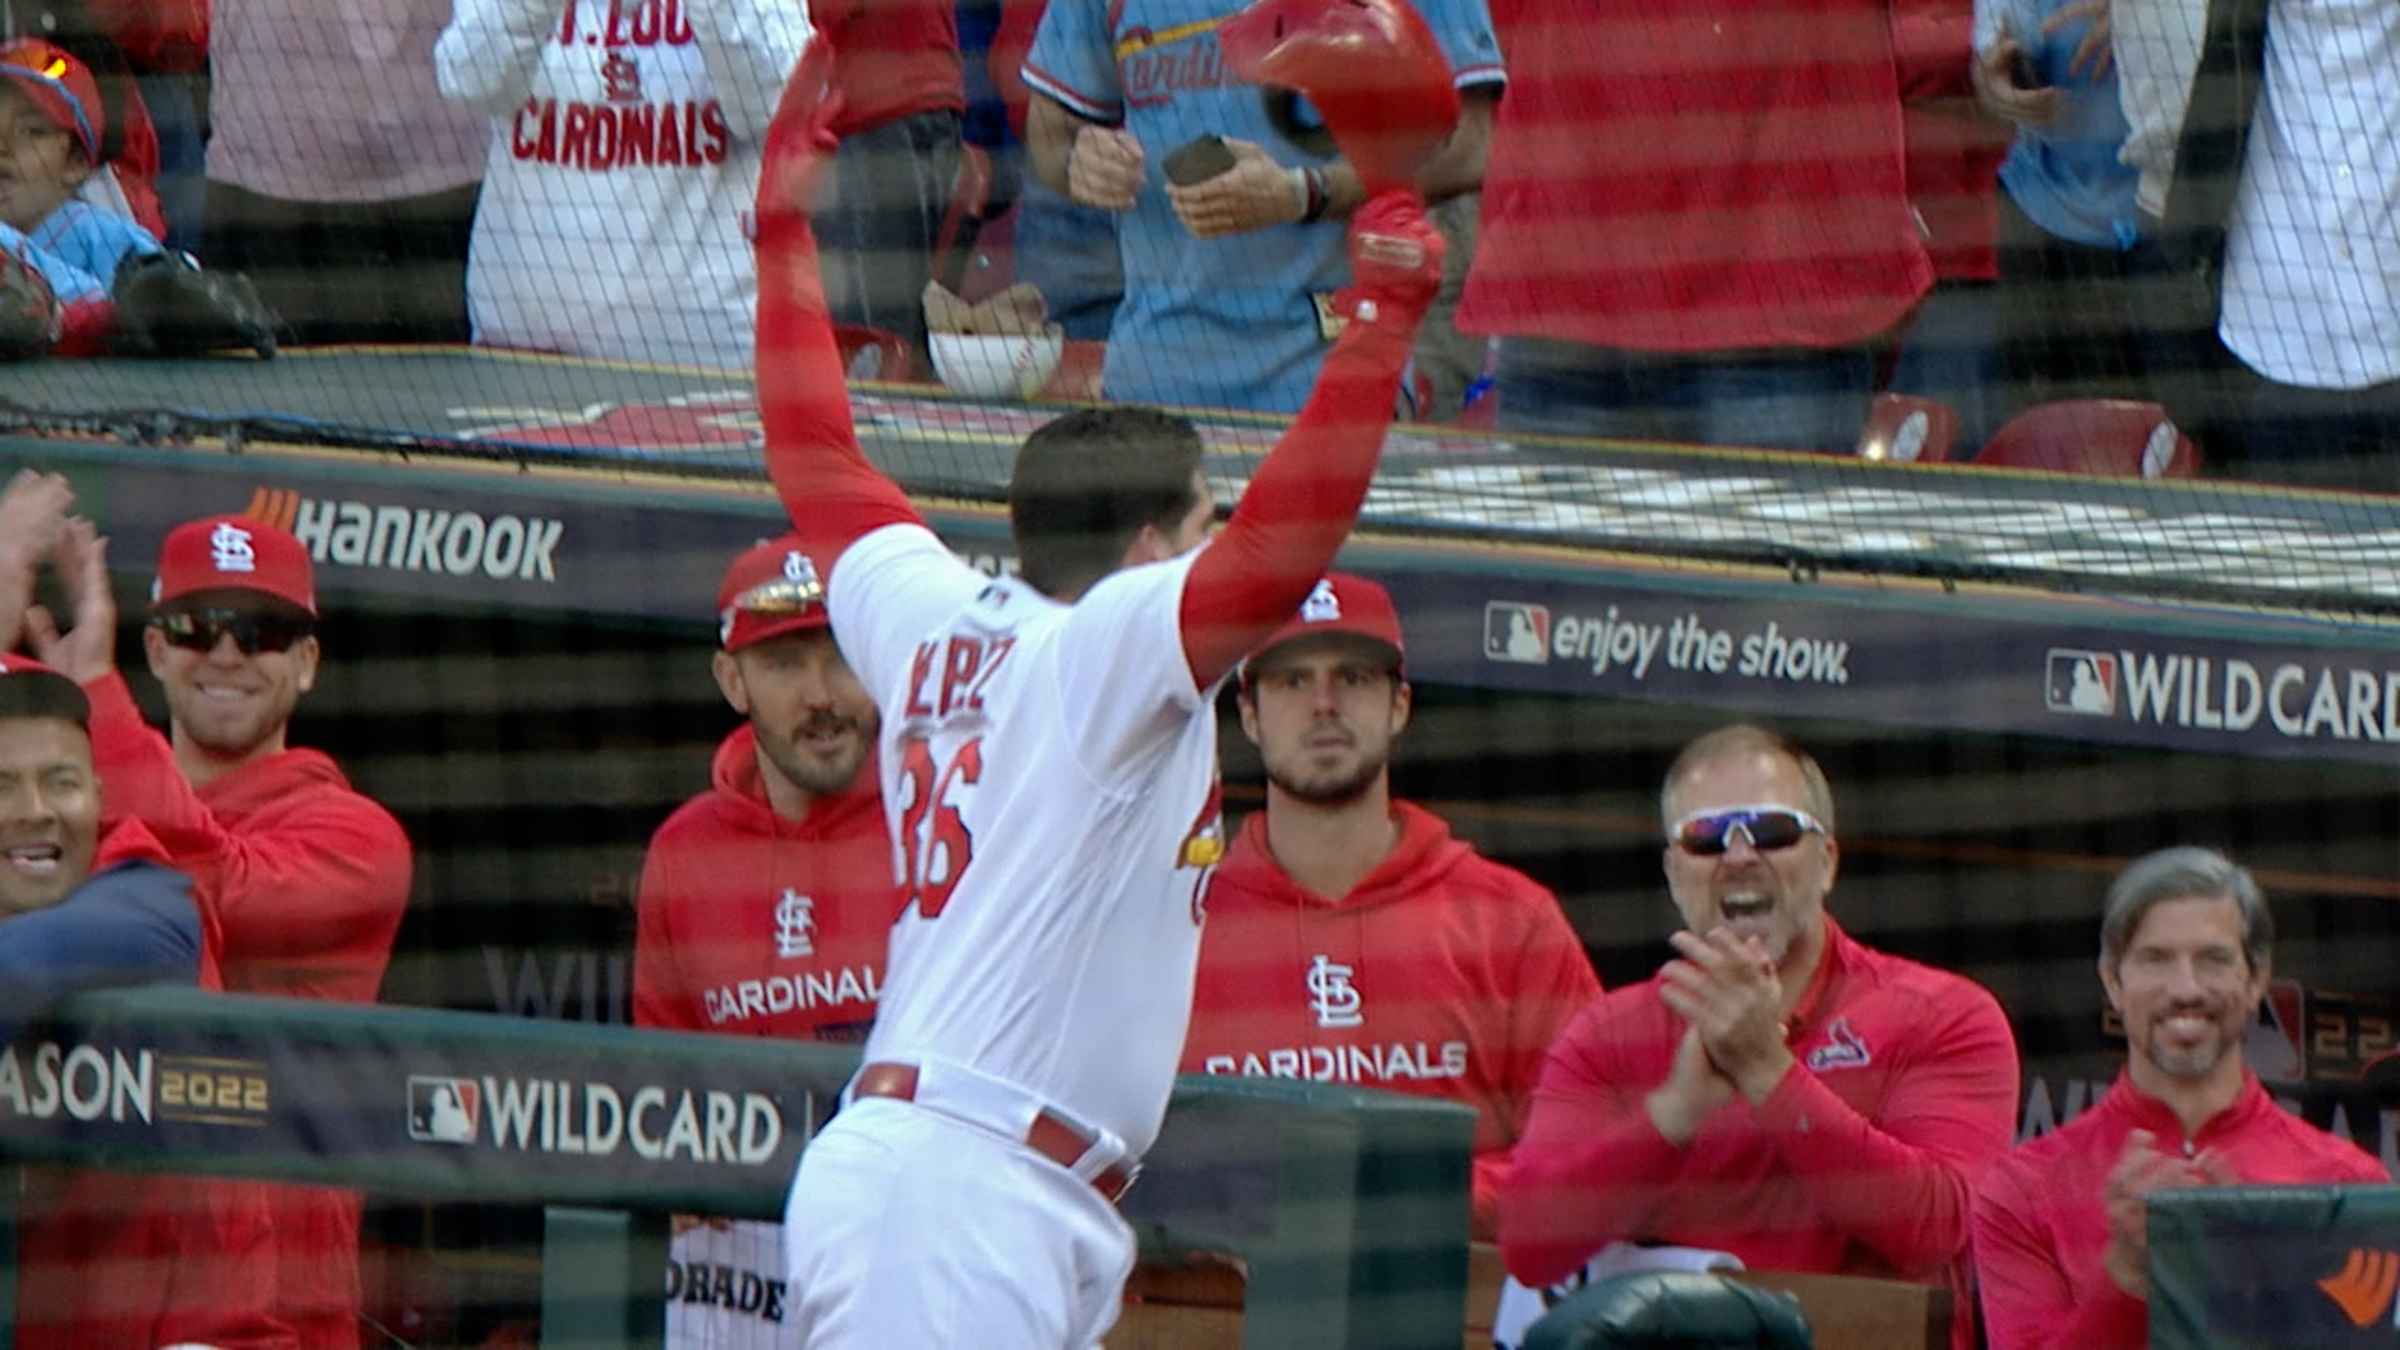 Juan Yepez breaks the deadlock as he hits a pinch hit 2-run homer to put  the Cardinals up 2-0 in the 7th! : r/baseball